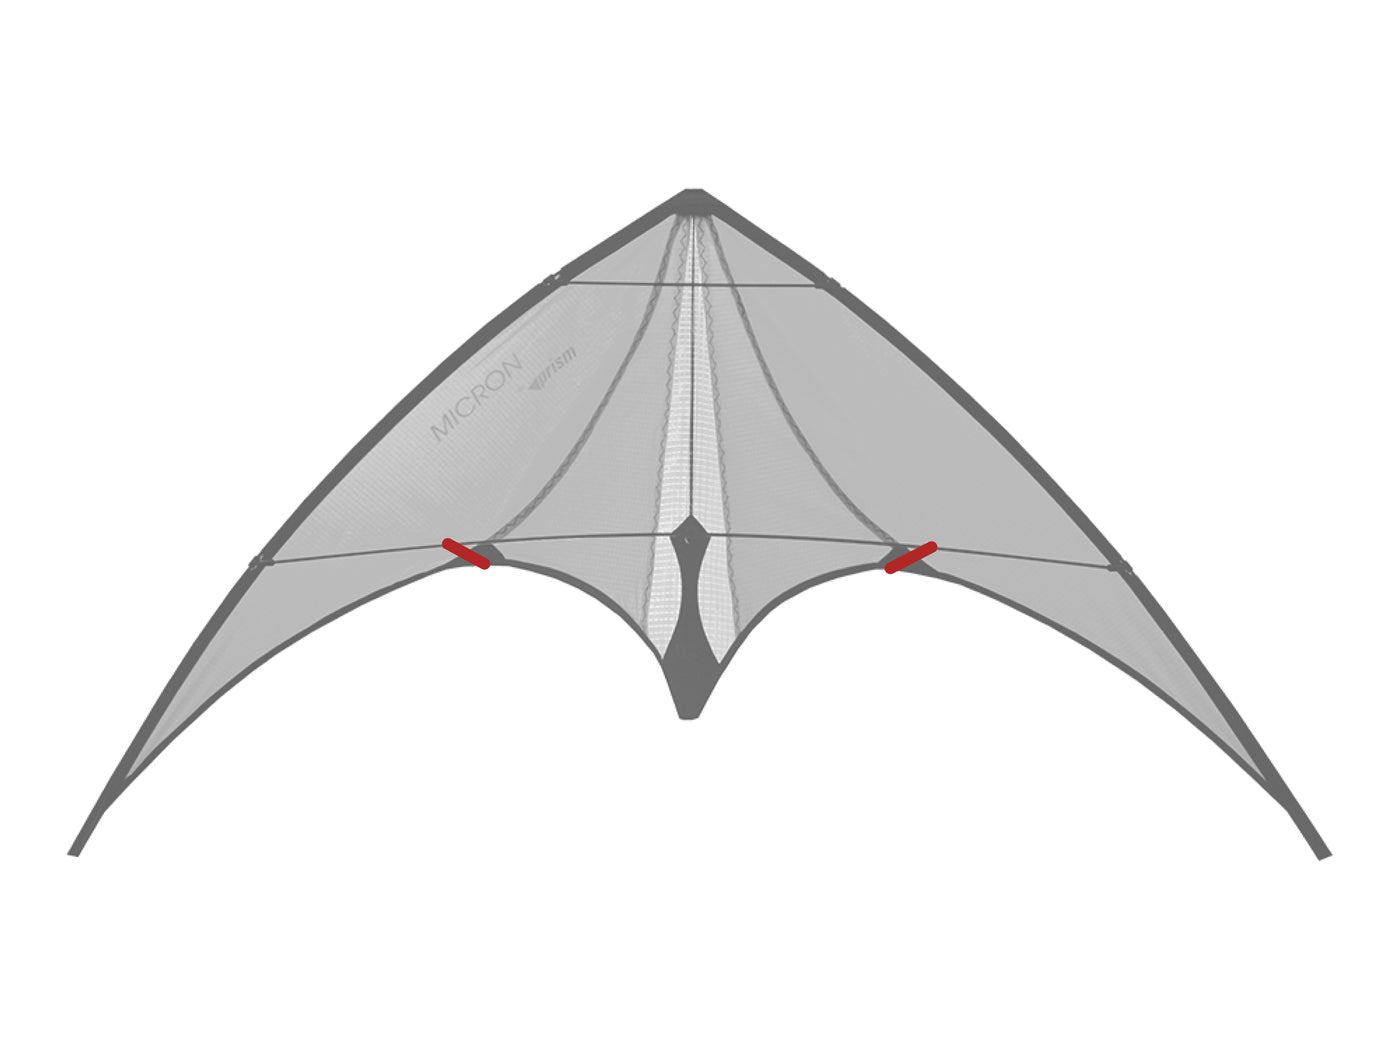 Diagram showing location of the Micron Standoffs on the kite.